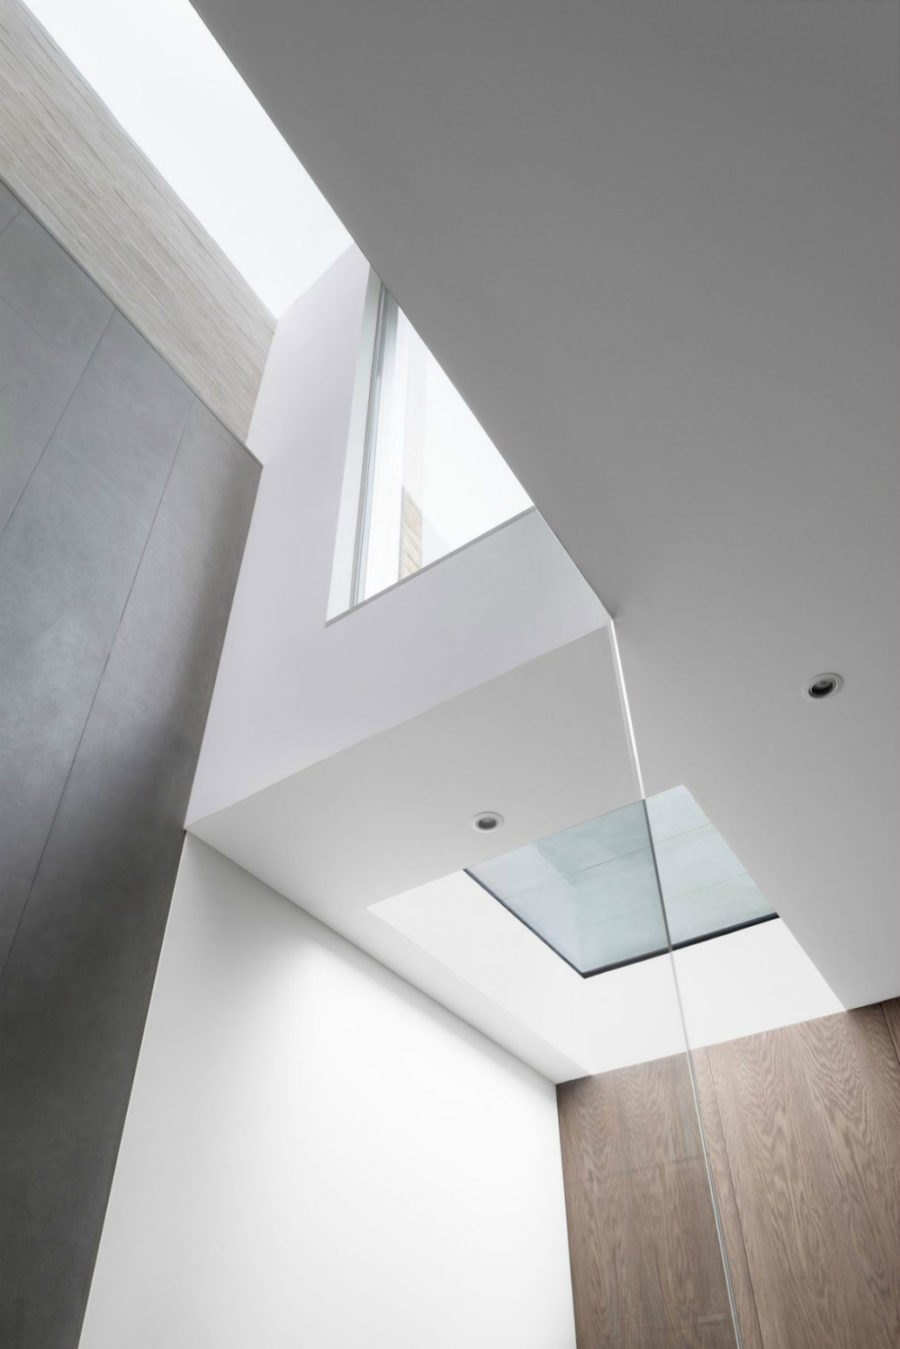 Skylights allow the light to travel through multiple levels